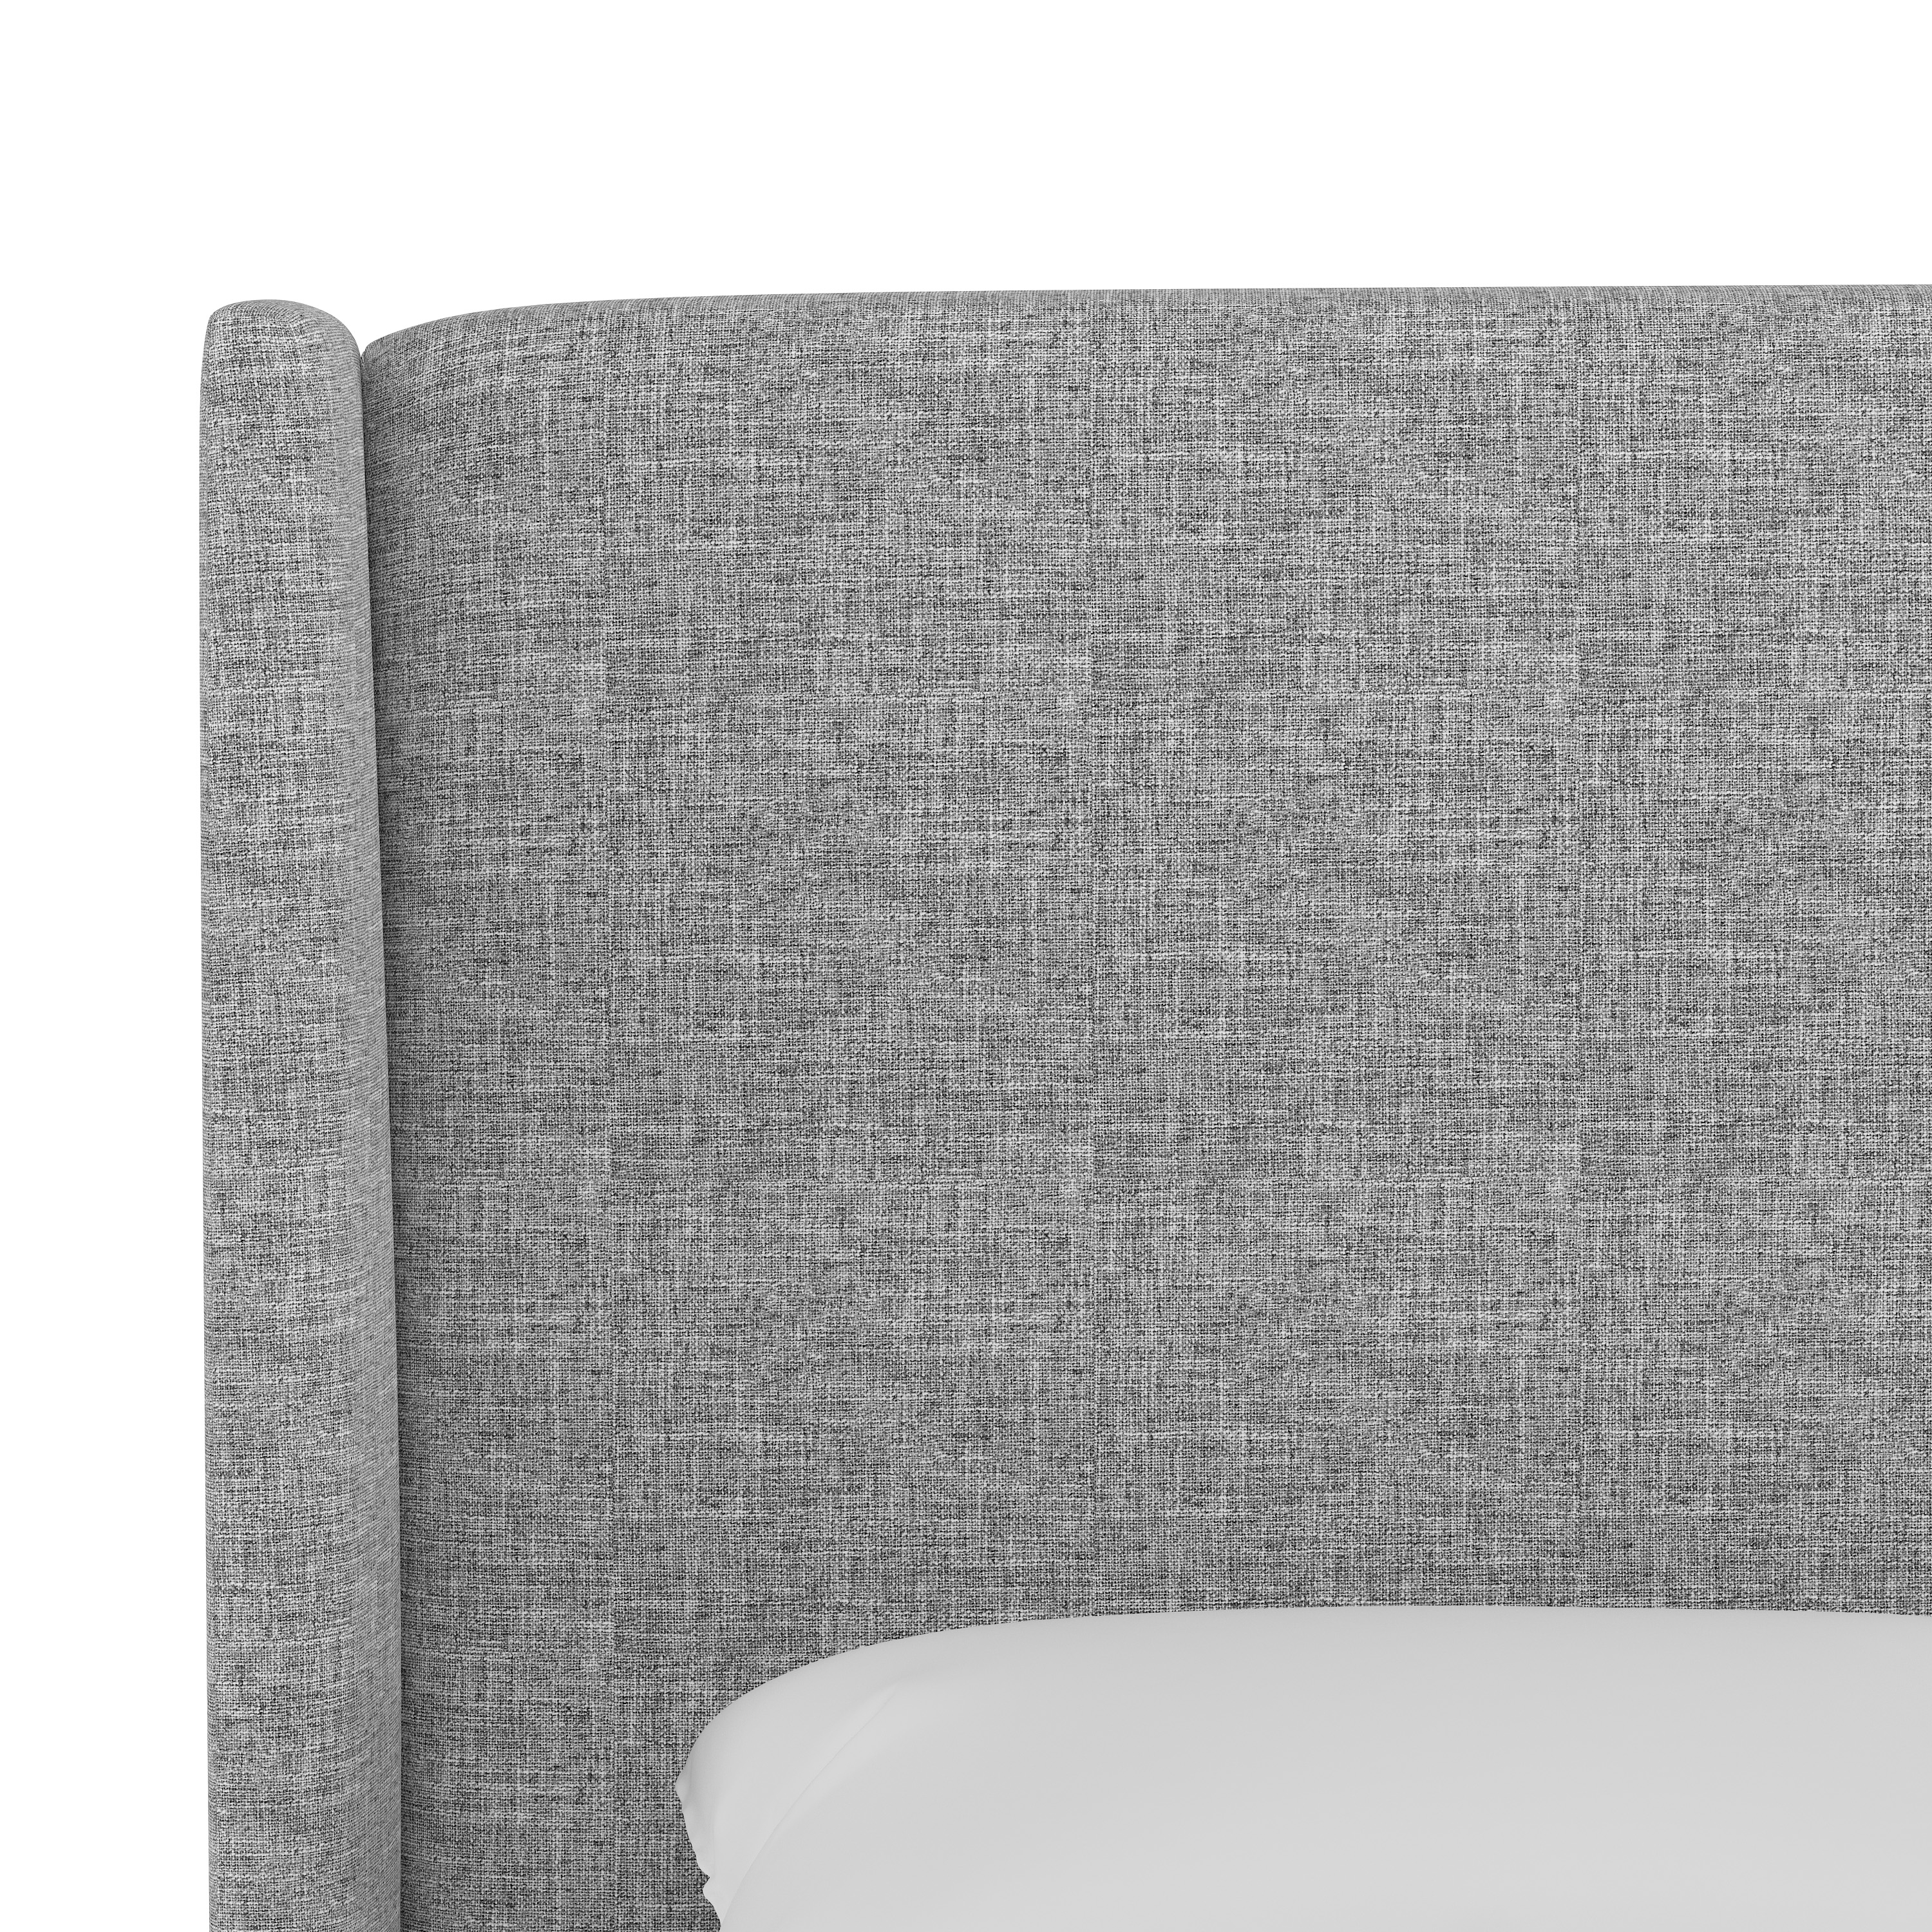 Queen Lawrence Wingback Bed in Zuma Pumice - Image 3